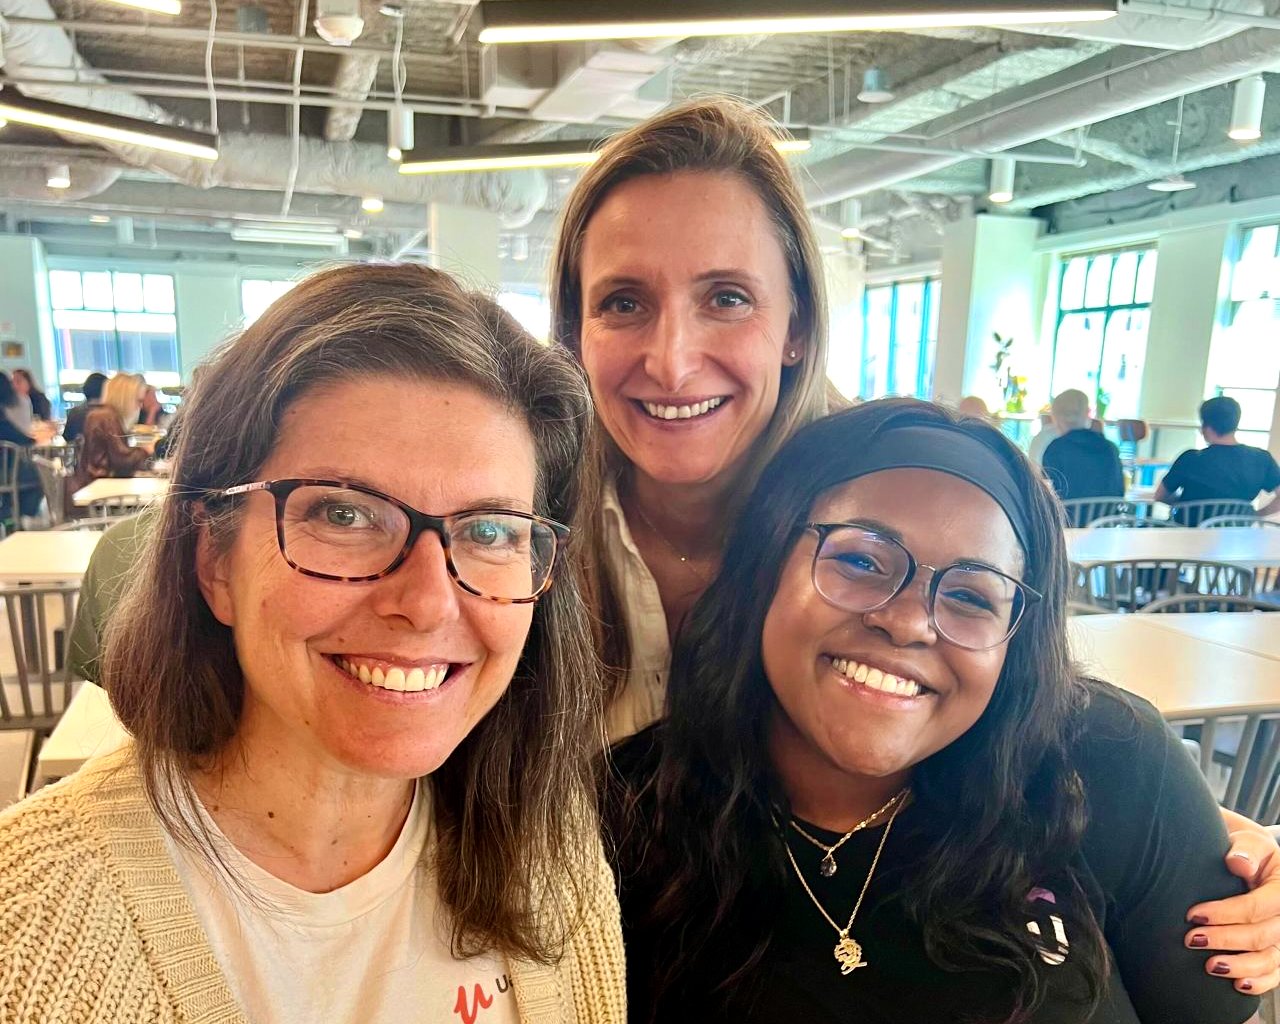 Three Udemy team members take a photo together in the office cafeteria.